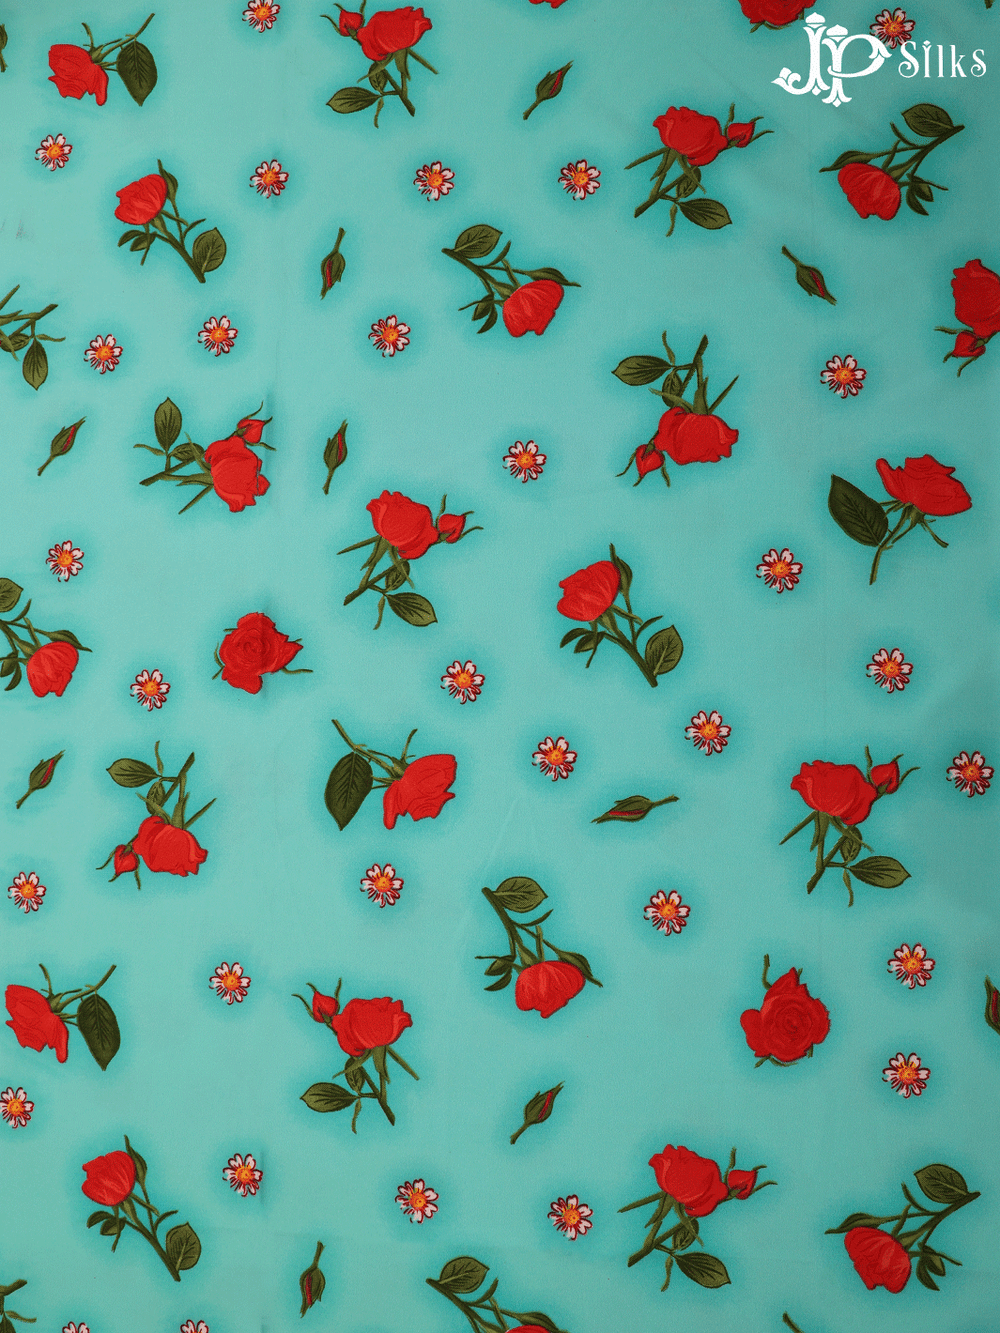 Teal Blue , Red and Green Digital Printed Chiffon Fabric - A14345 - View 1